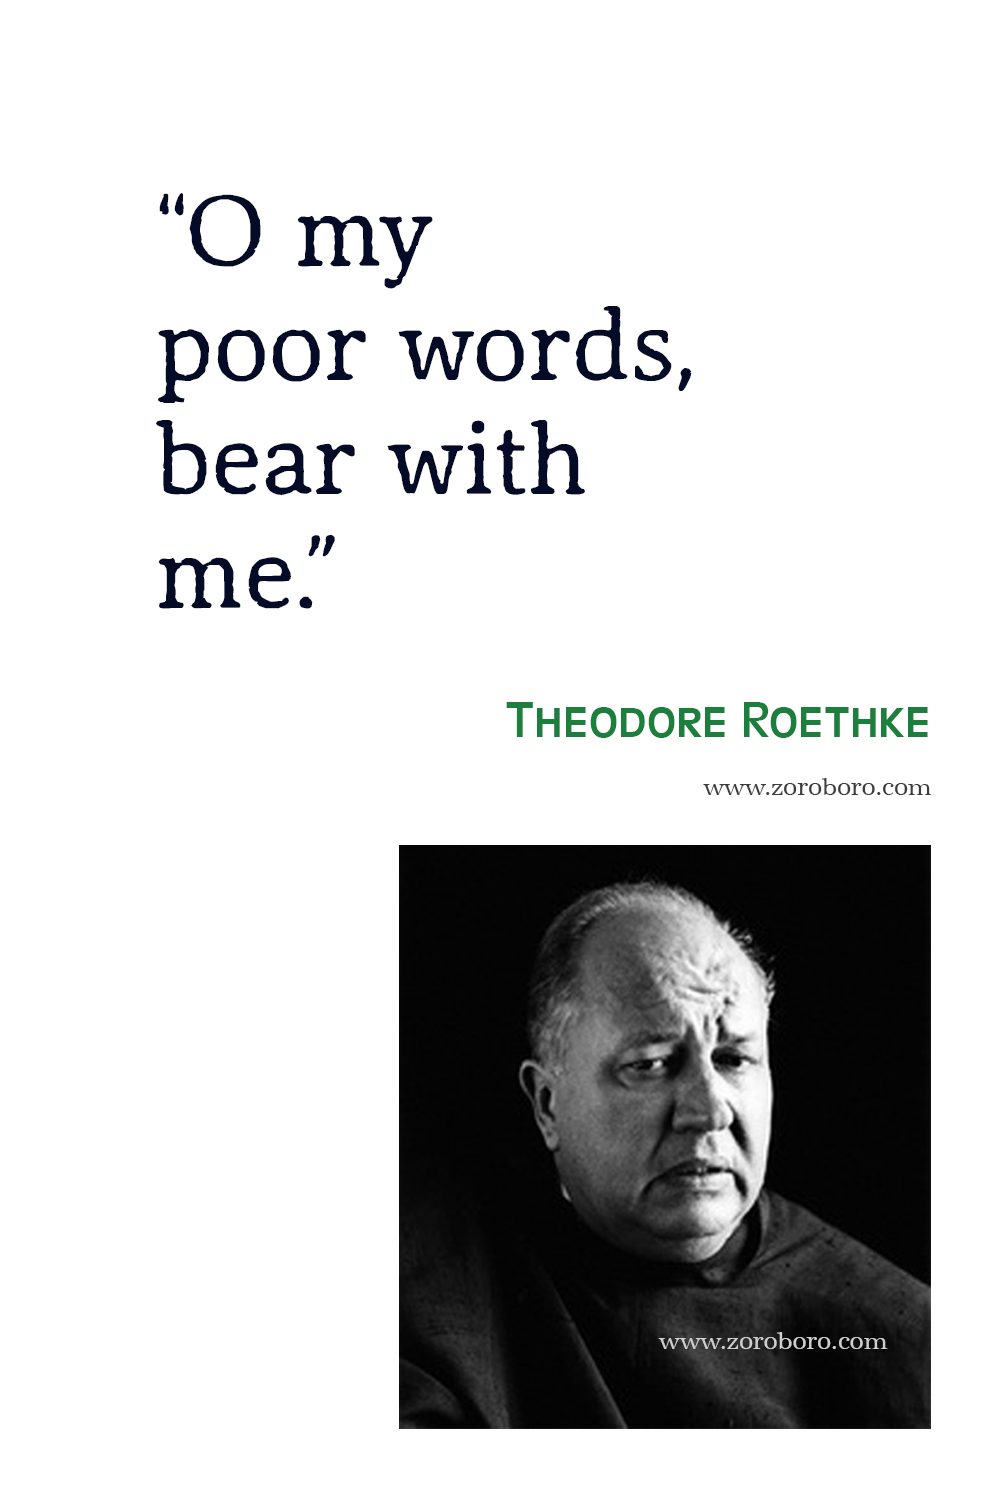 Theodore Roethke Quotes, Theodore Roethke Poems, Poetry, Theodore Roethke Books Quotes, Theodore Roethke, The Collected Poems, Dream, Love, Life.